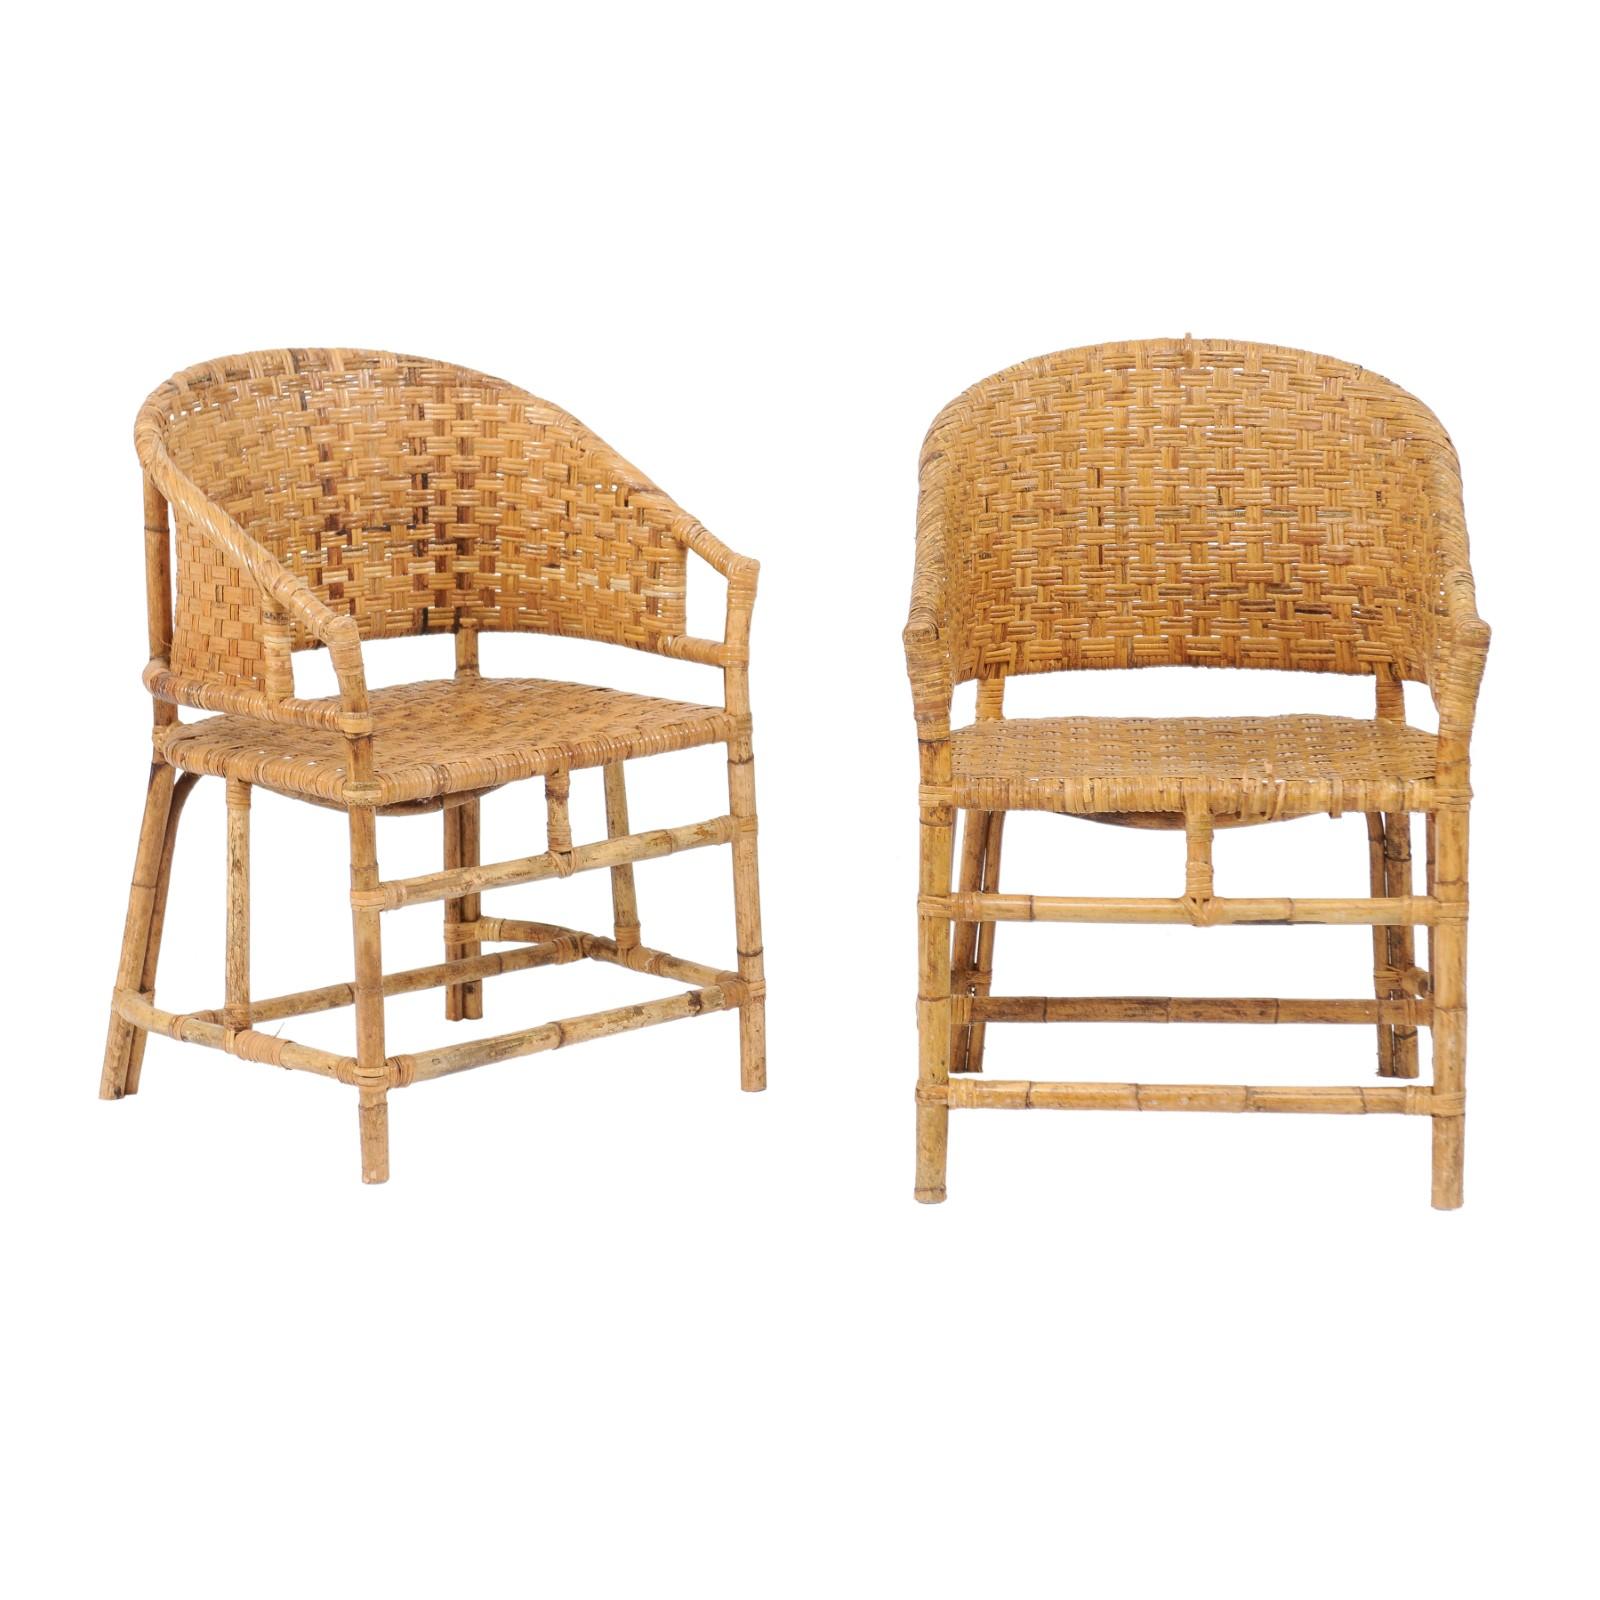 Vintage French Midcentury Woven Rattan and Bamboo Chairs